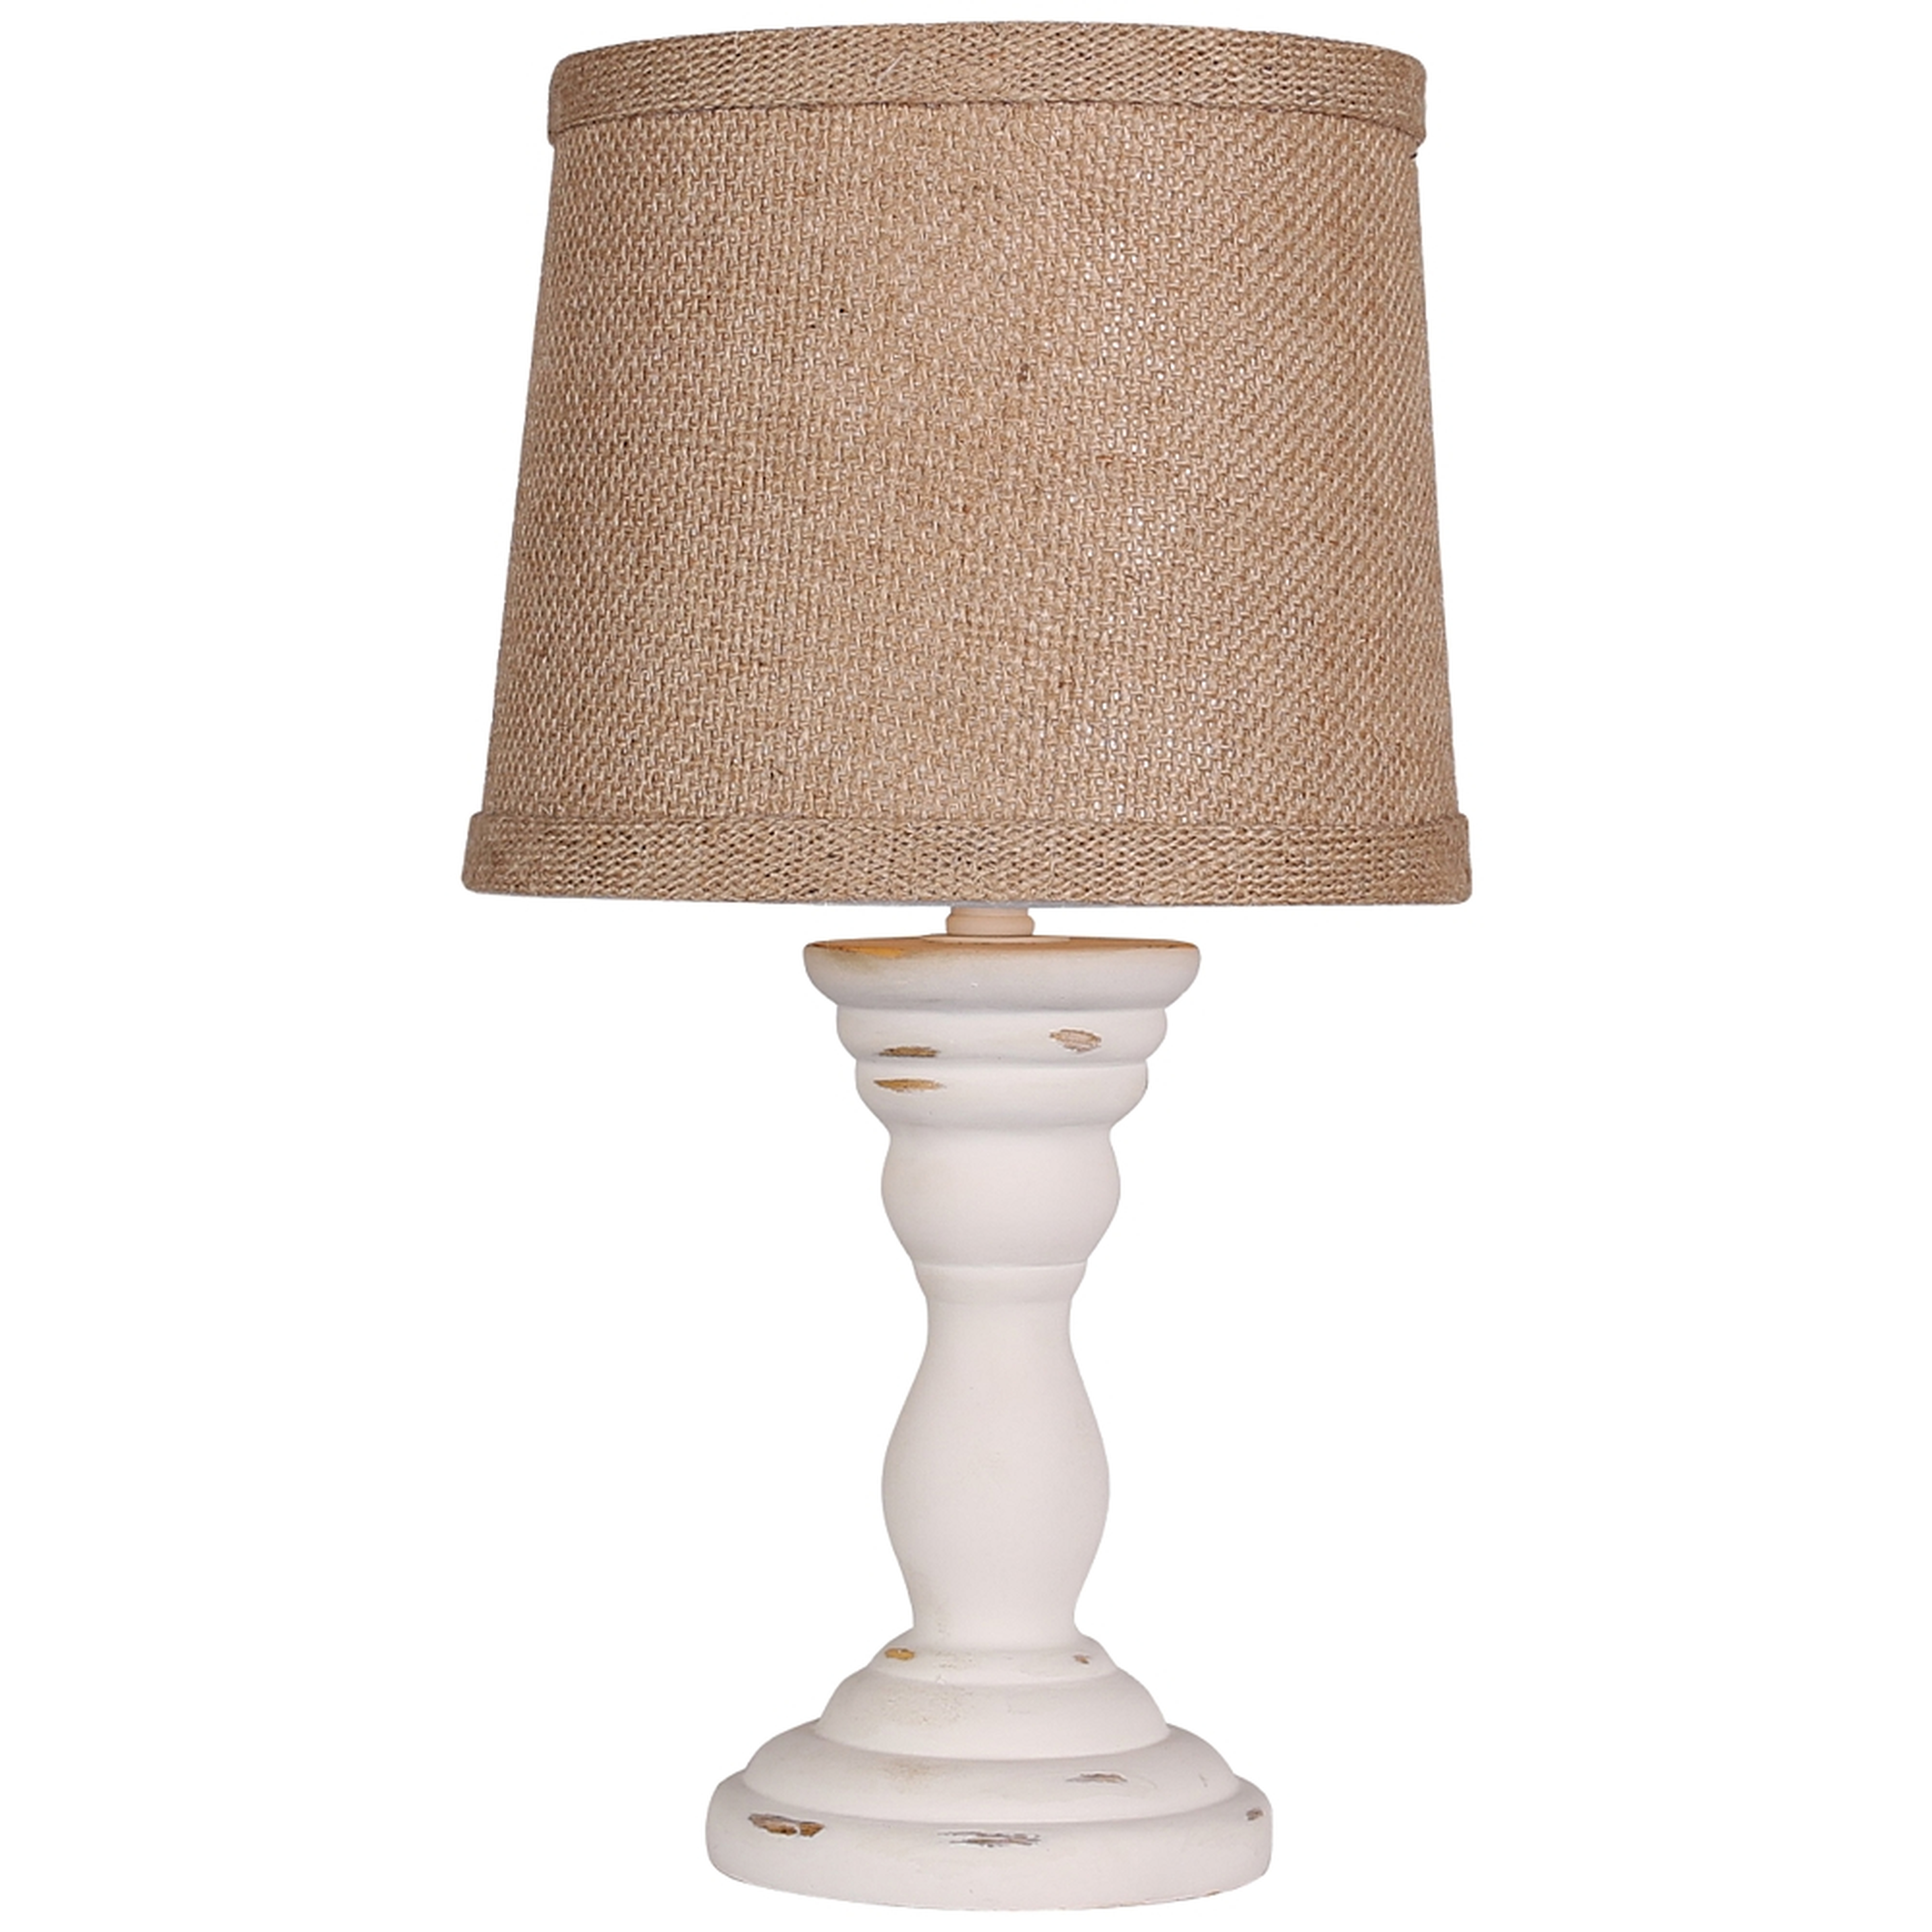 Randolph 12"H Distressed White Pedestal Accent Table Lamp - Style # 78E17 - Lamps Plus